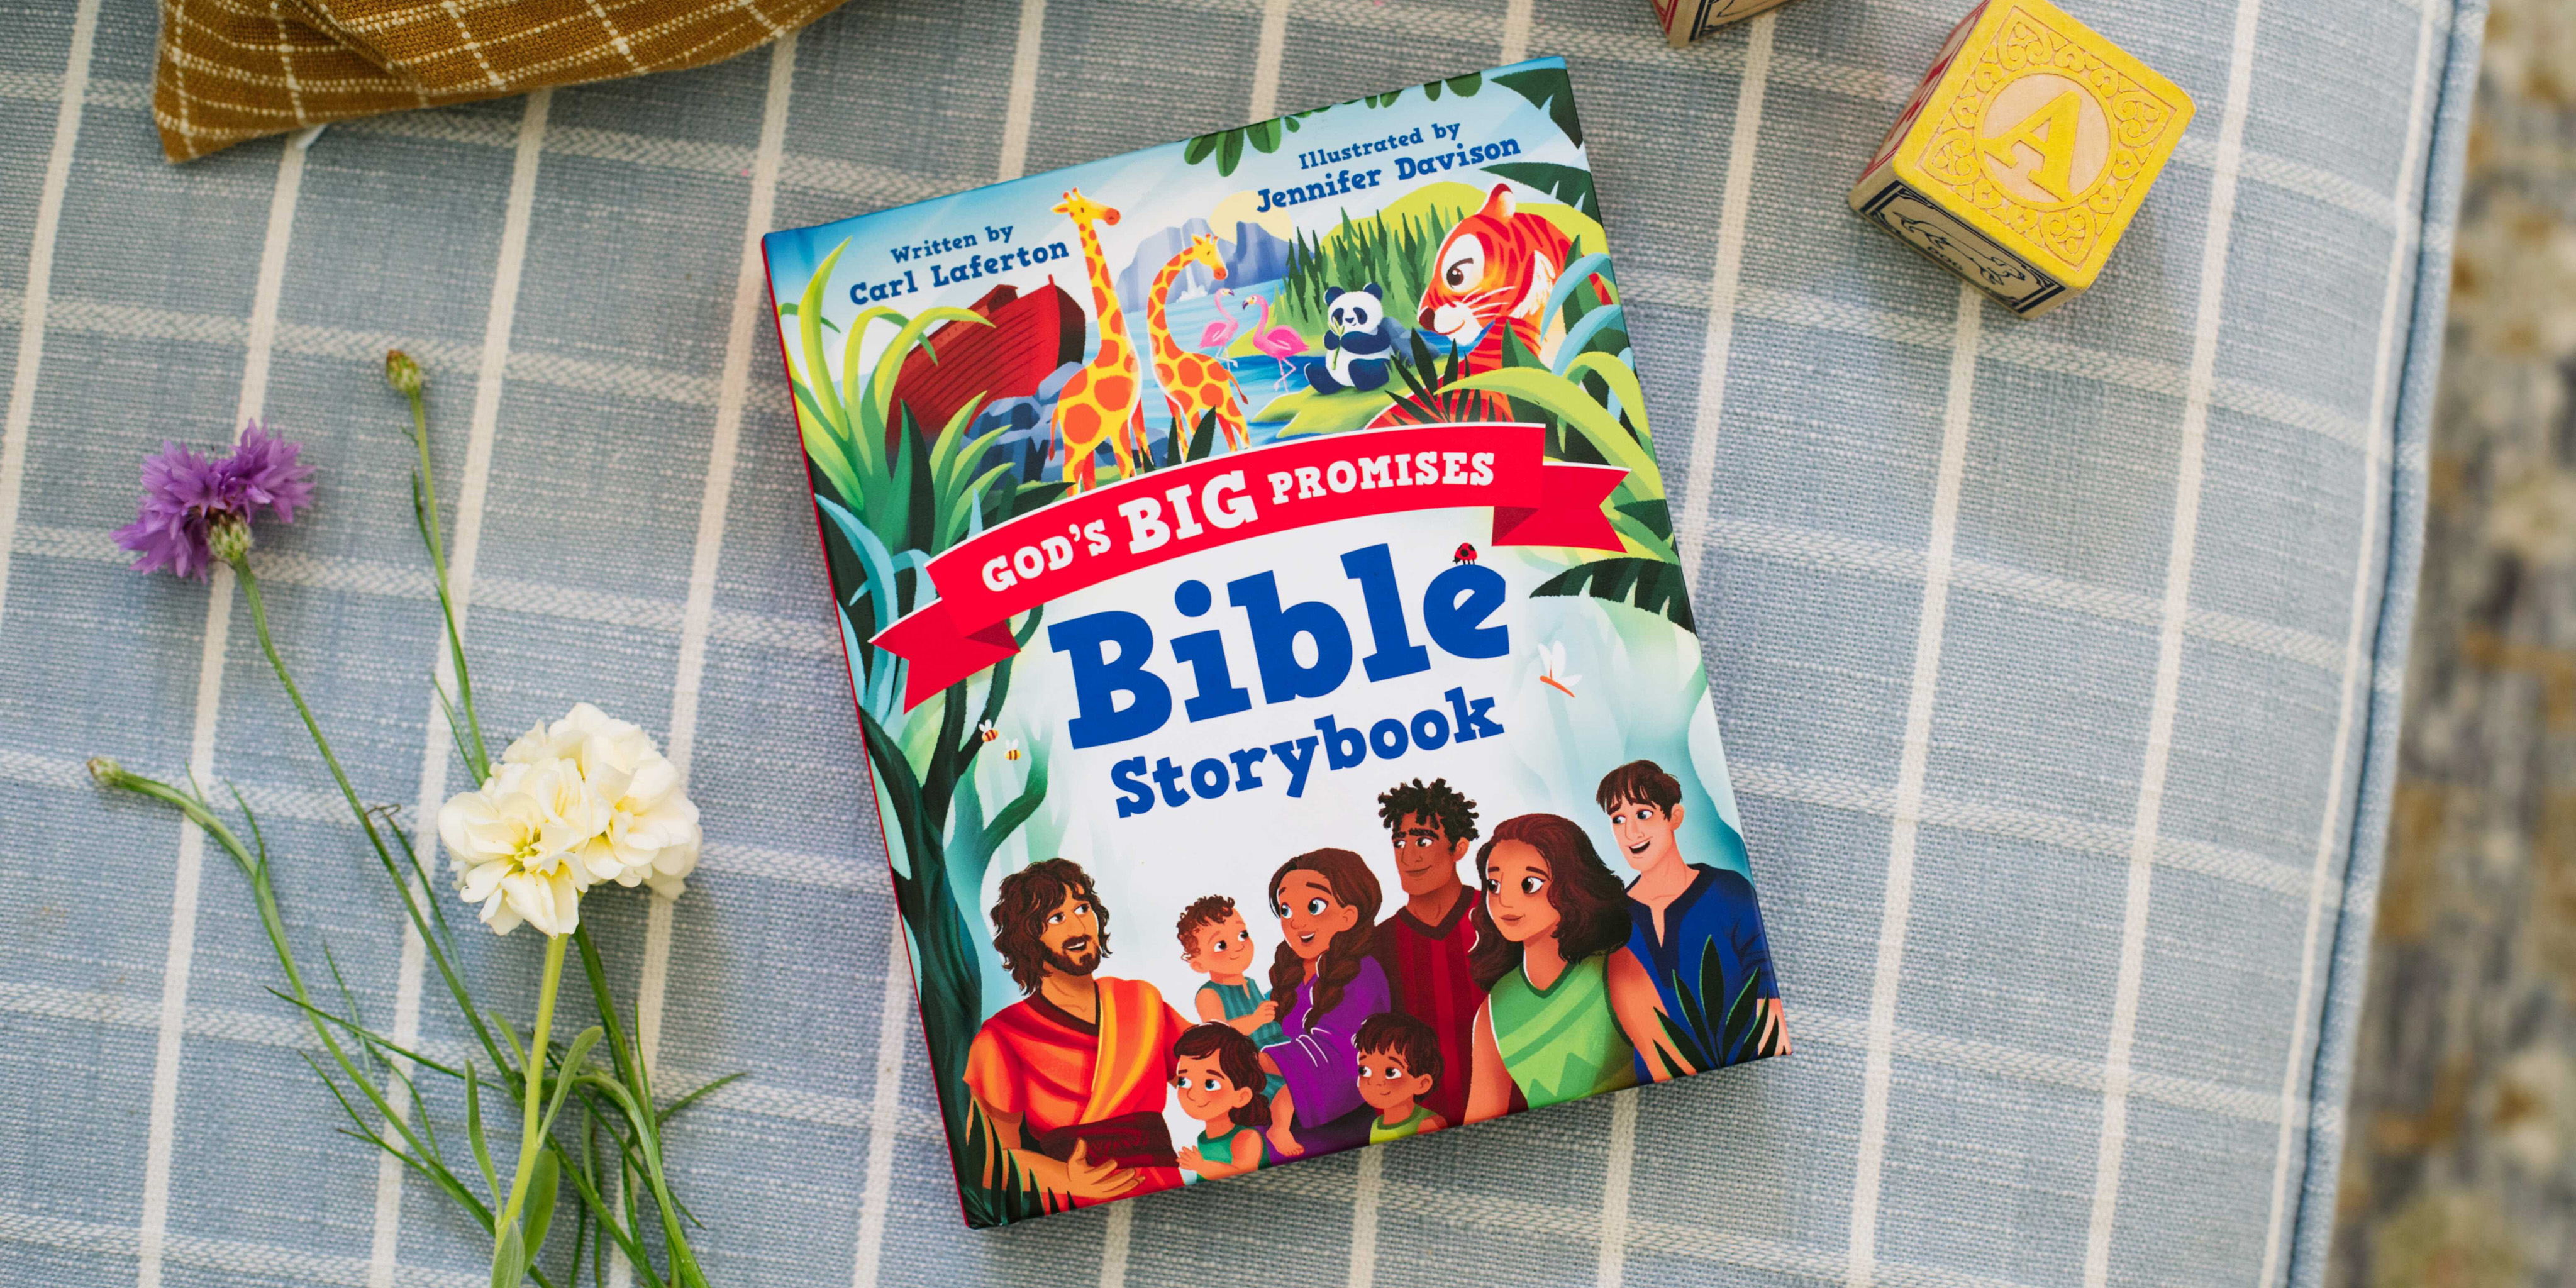 Photograph of God's Big Promises Bible Storybook on upholstery with flowers and children's blocks nearby. This photograph is located at the top of the Products page.